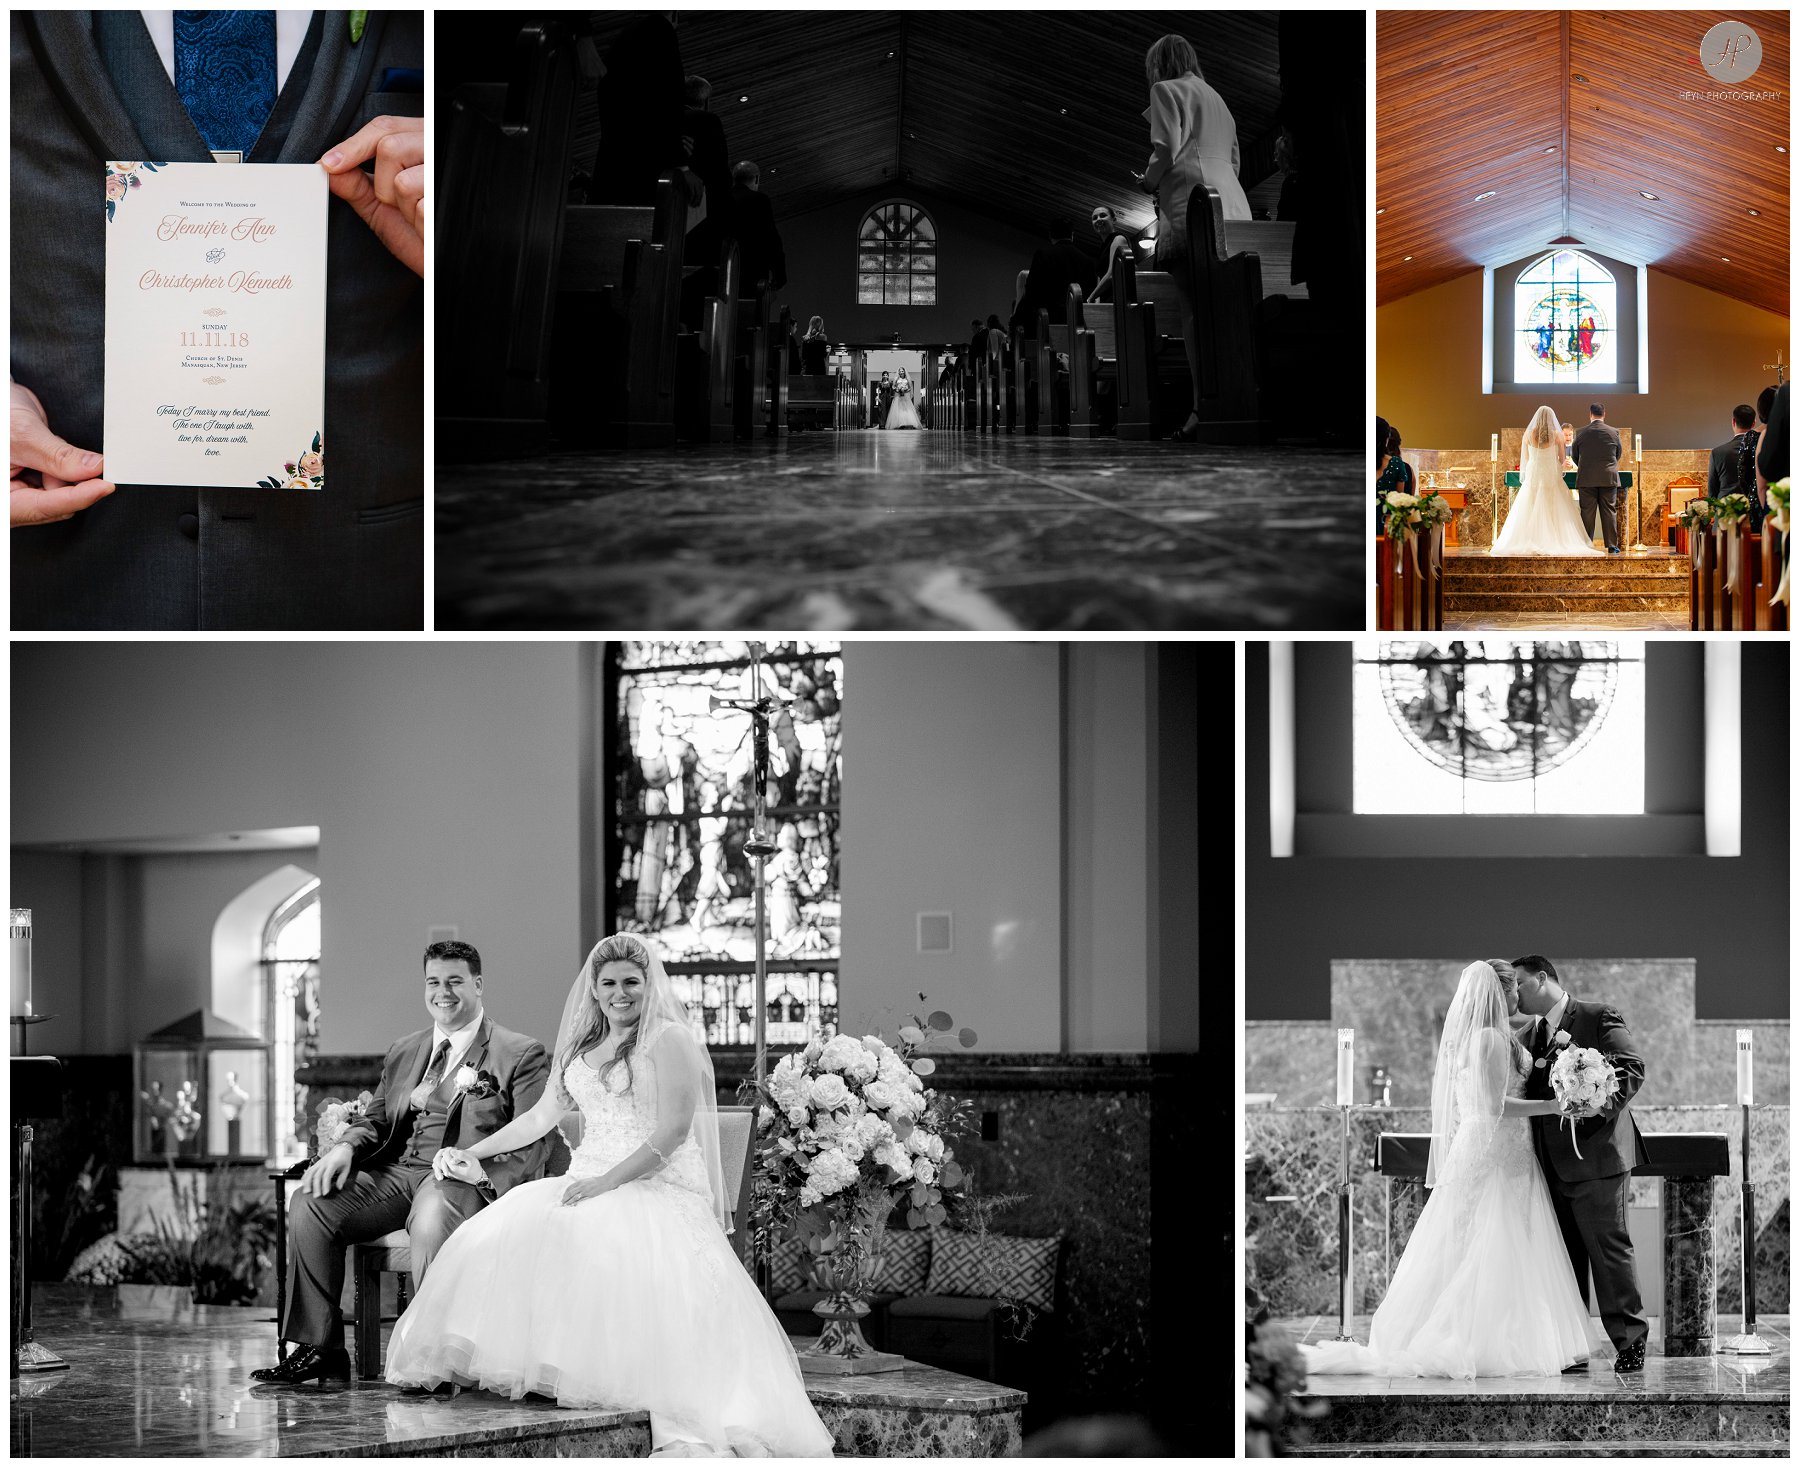 church ceremony before south gate manor wedding in new jersey